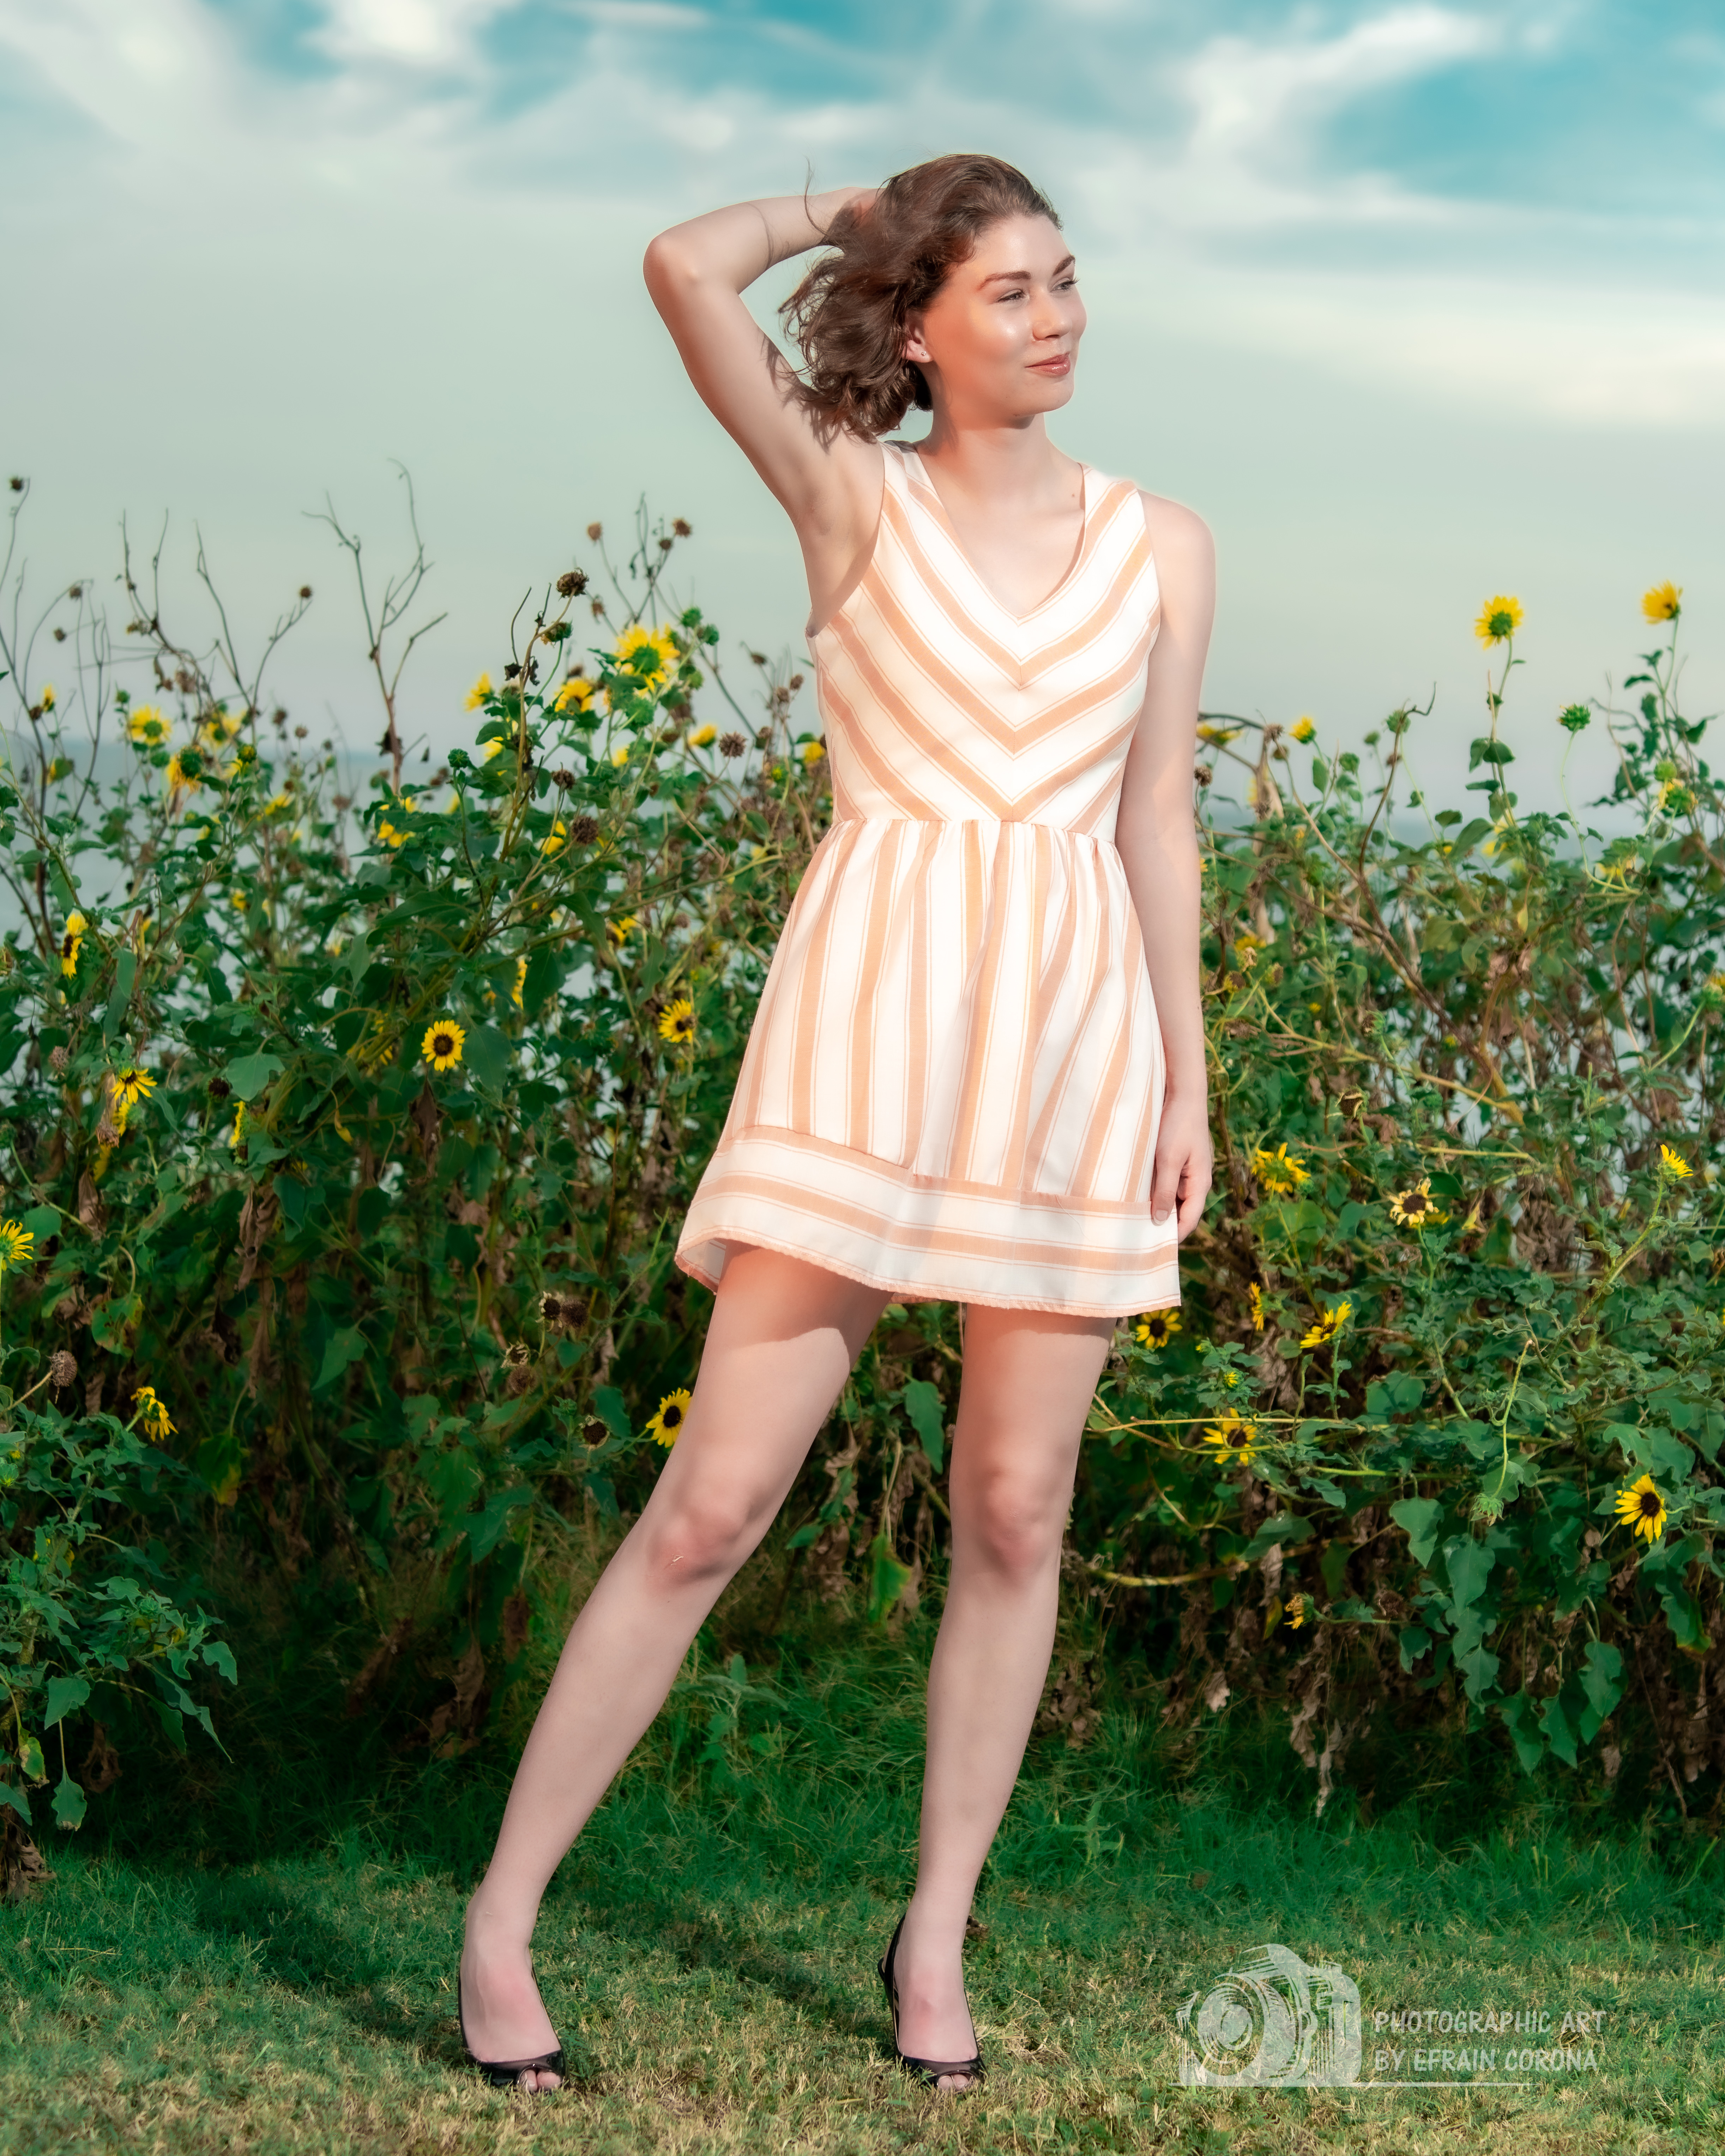 Hailey posing by sunflowers in a peach striped dress.